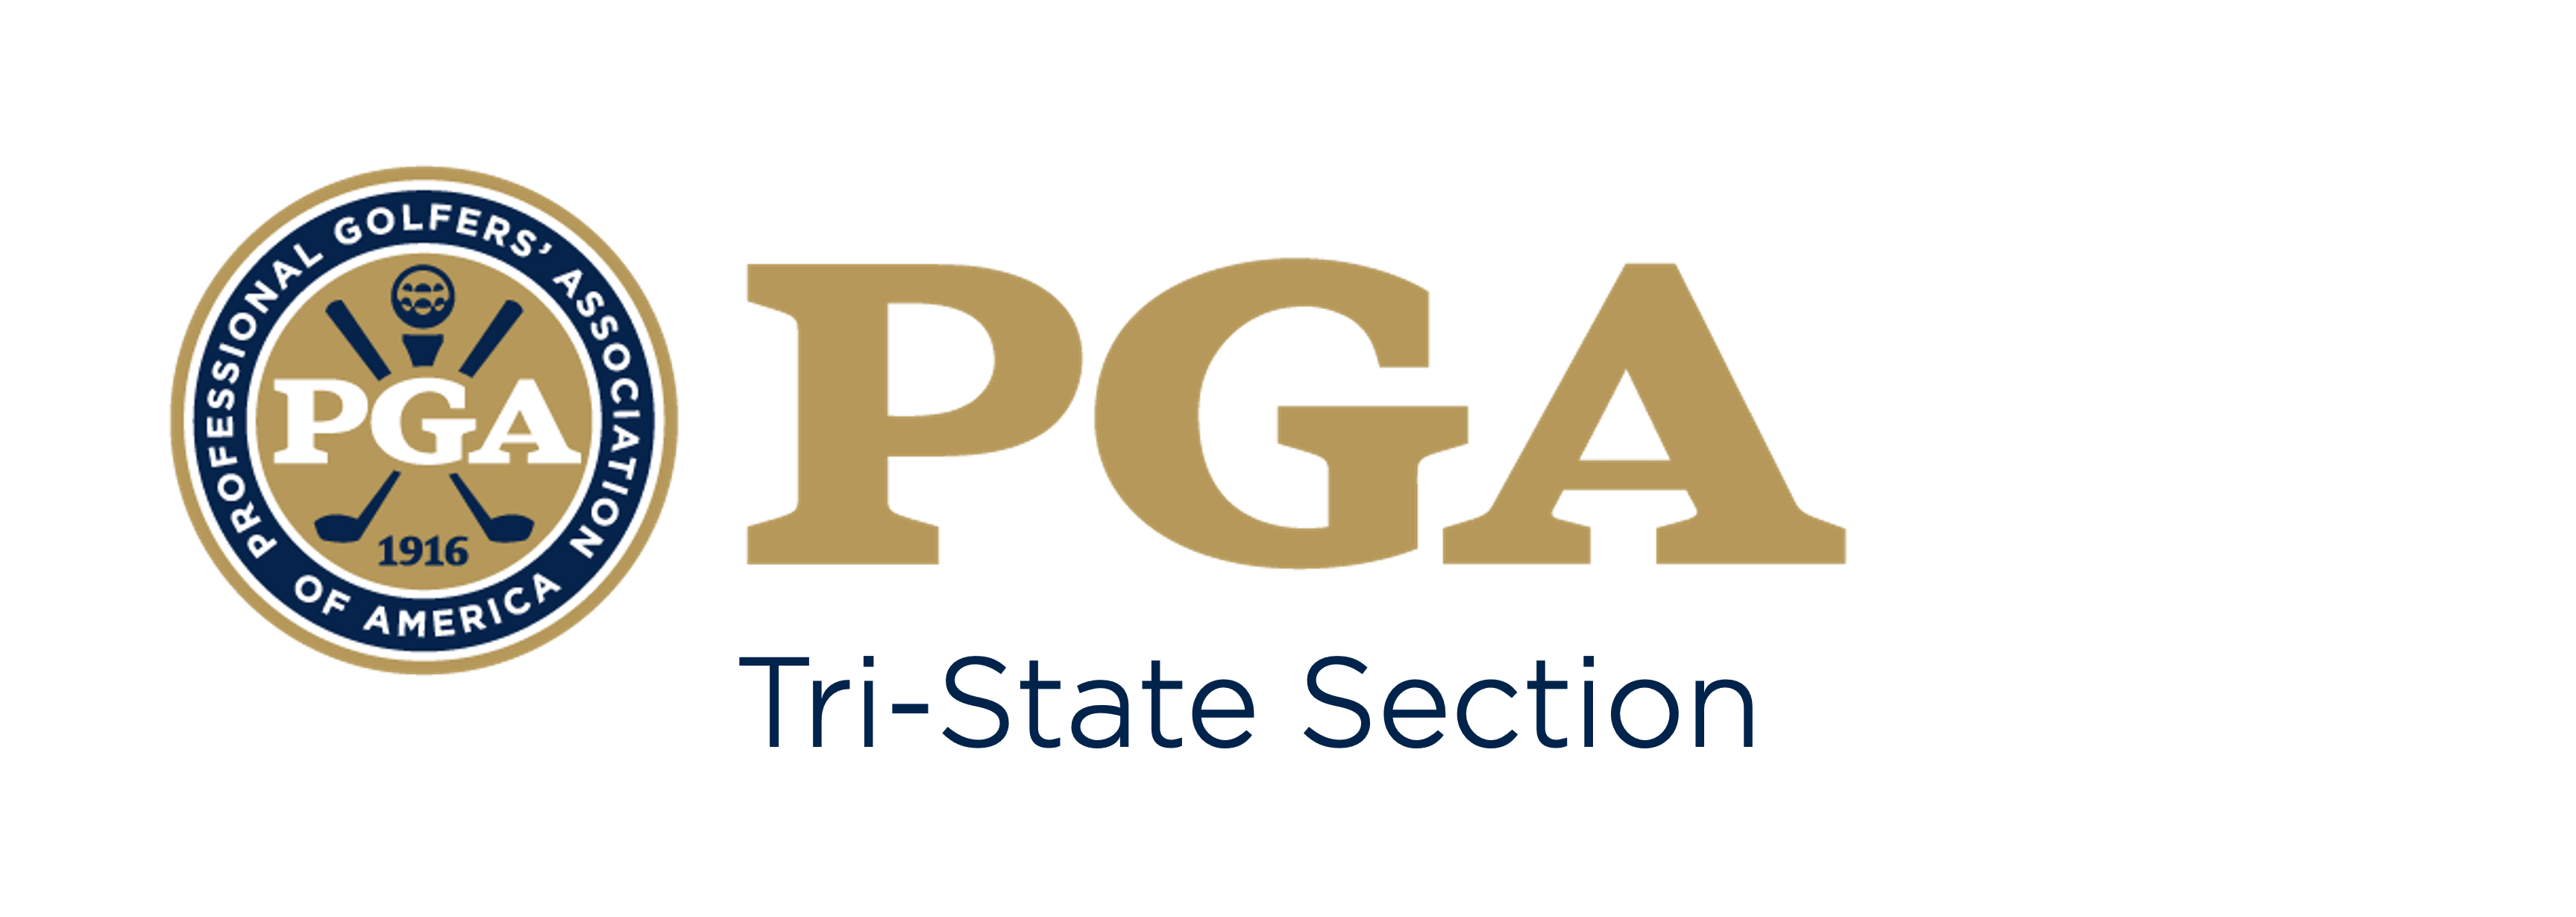 tri-state pga section